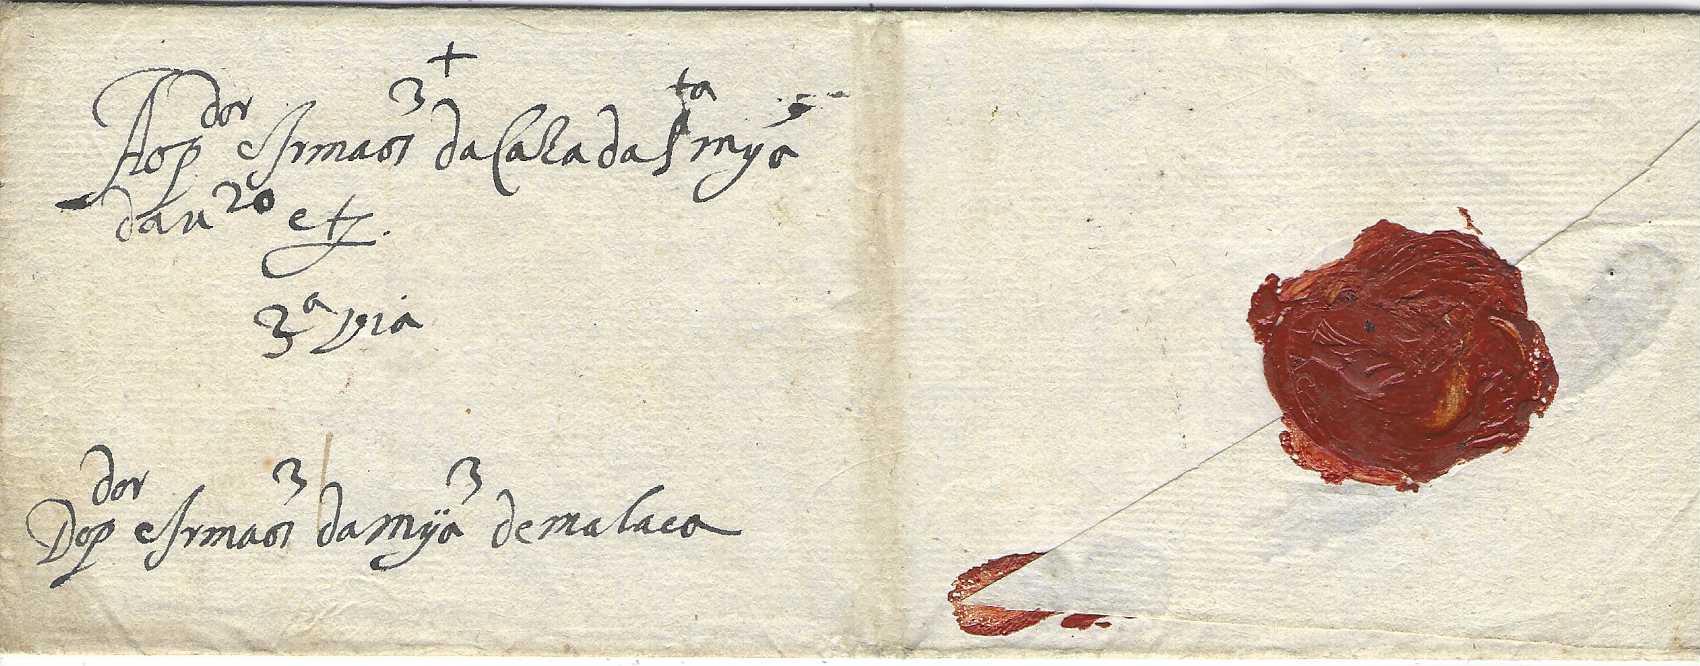 Malaya (Malacca - Portuguese Mail) 1611 (12 Jan) entire letter written in Portuguese from the Holy House of Mia (Misericordia), Malacca to the same order in Portugal and showing on reverse red wax seal, the entire with the signatures of the members of the brotherhood. Believed to be the earliest known cover from Malacca.